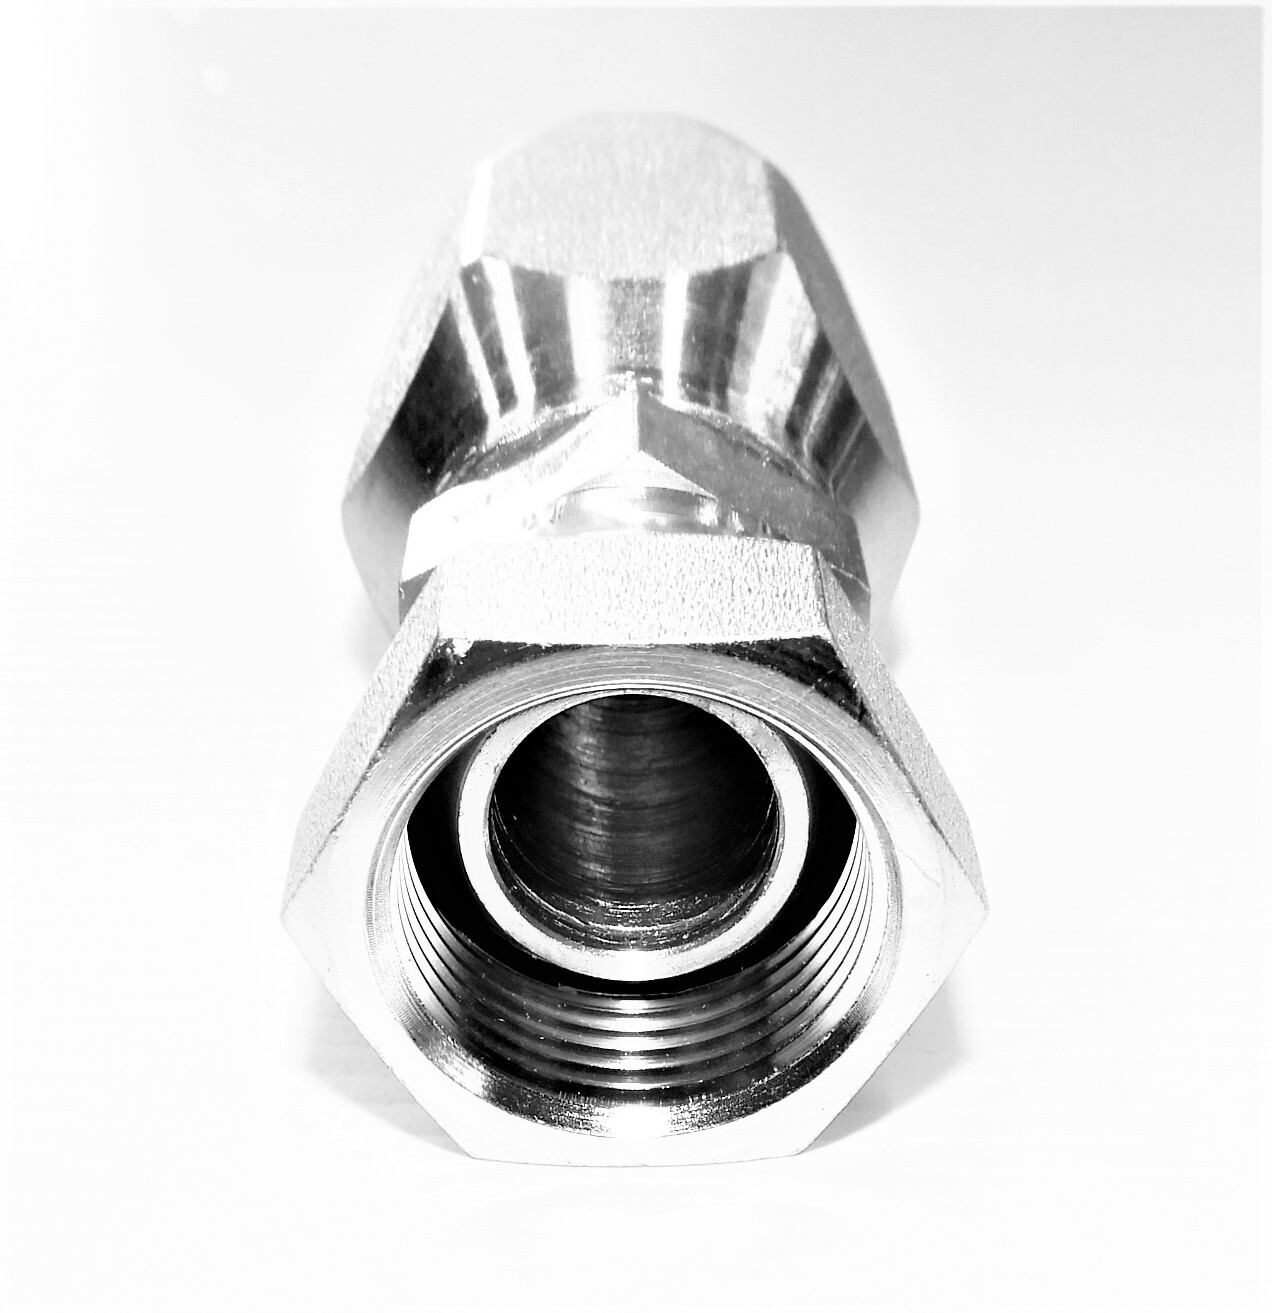 BSP Female Field Fit Reusable Hose Fittings (Straight)